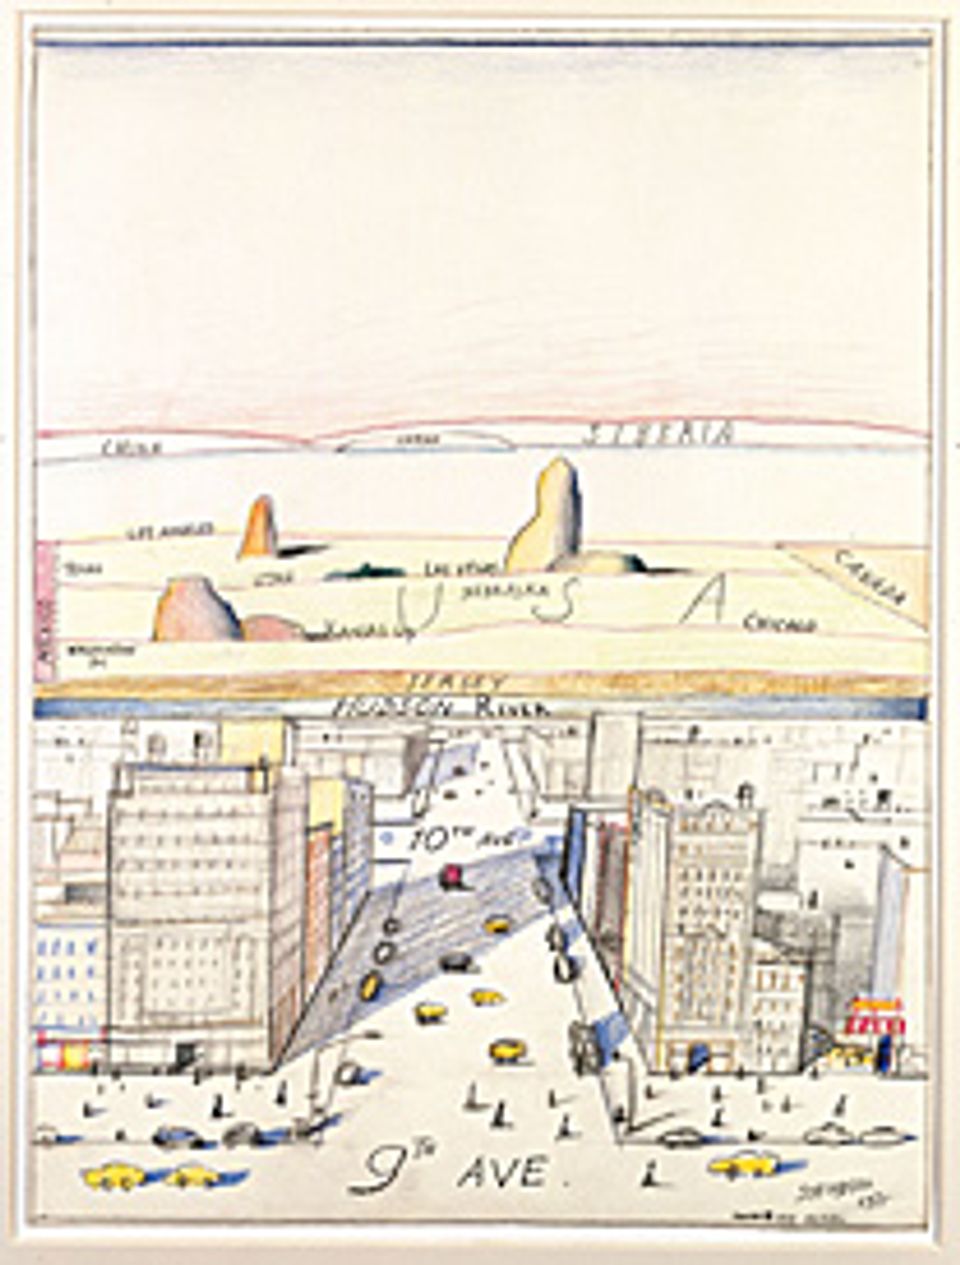 A perspective drawing of a city and the landscape in the background. 